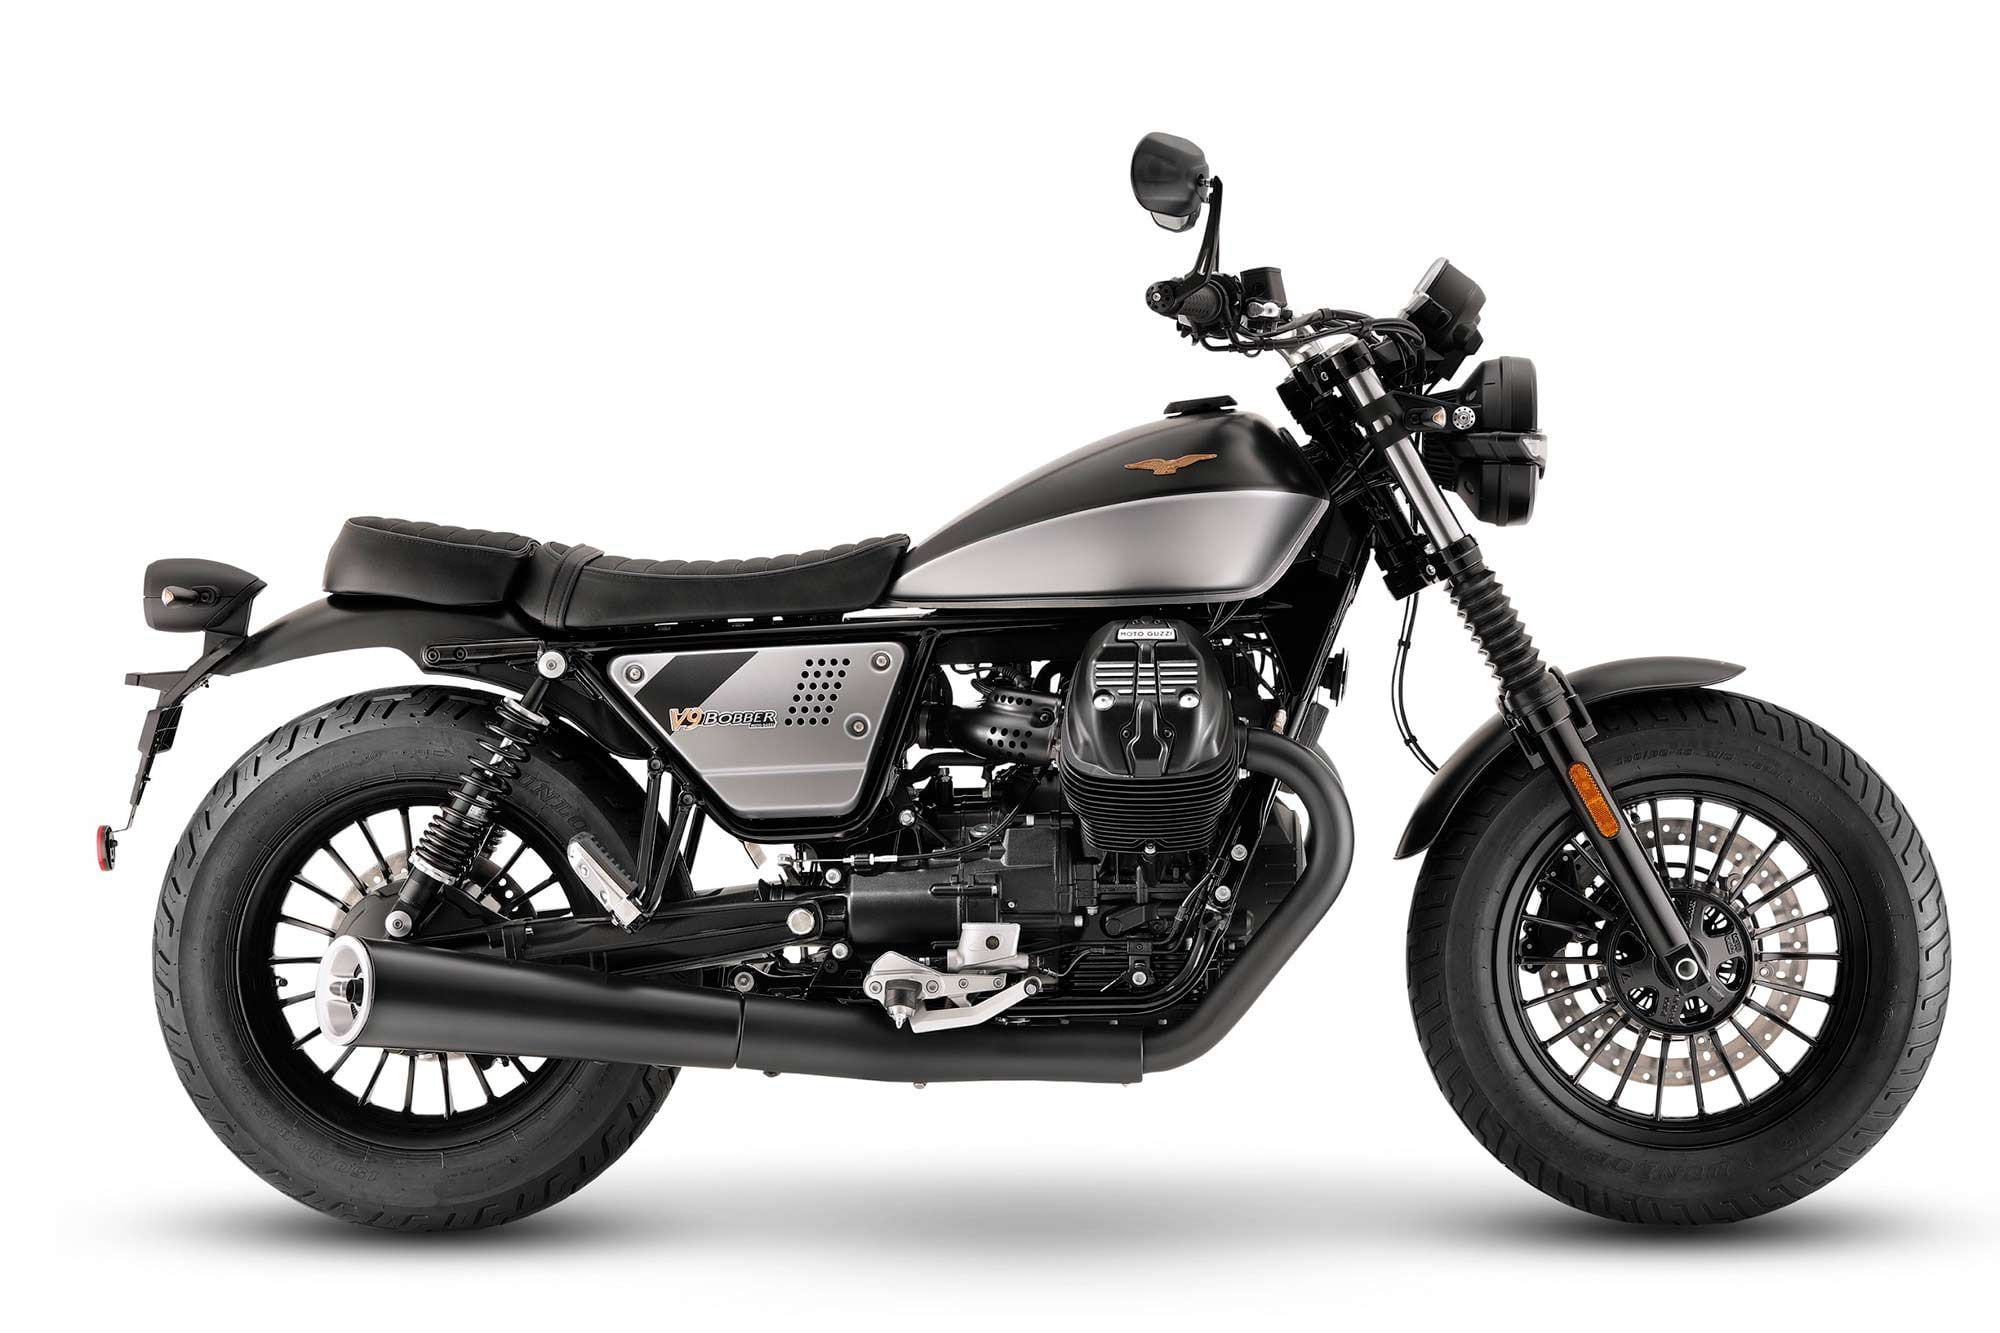 The Special Edition is based on the stock V9 Bobber, but it’s primarily a cosmetic treatment, with no mechanical changes.